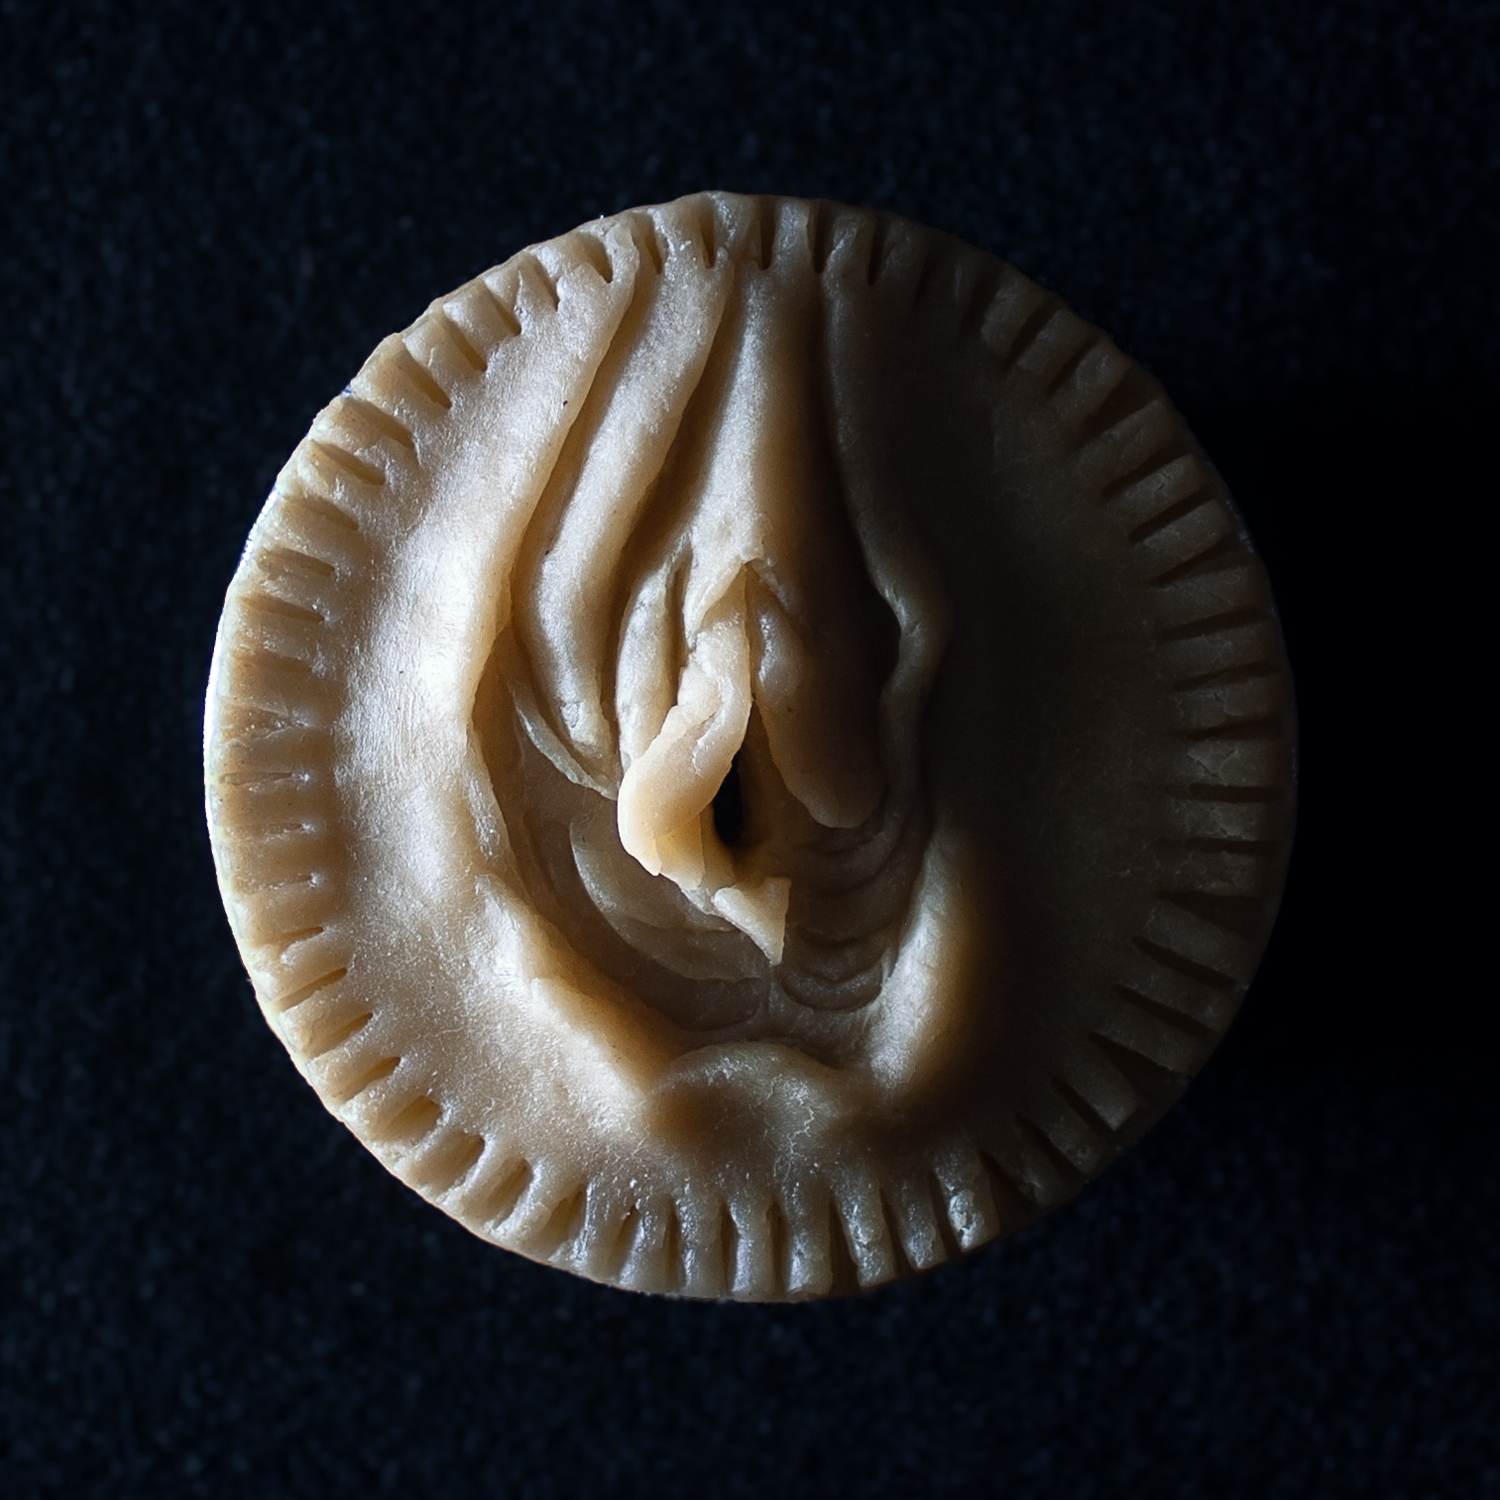 Pie One, a pie sculpted to appear like a vulva